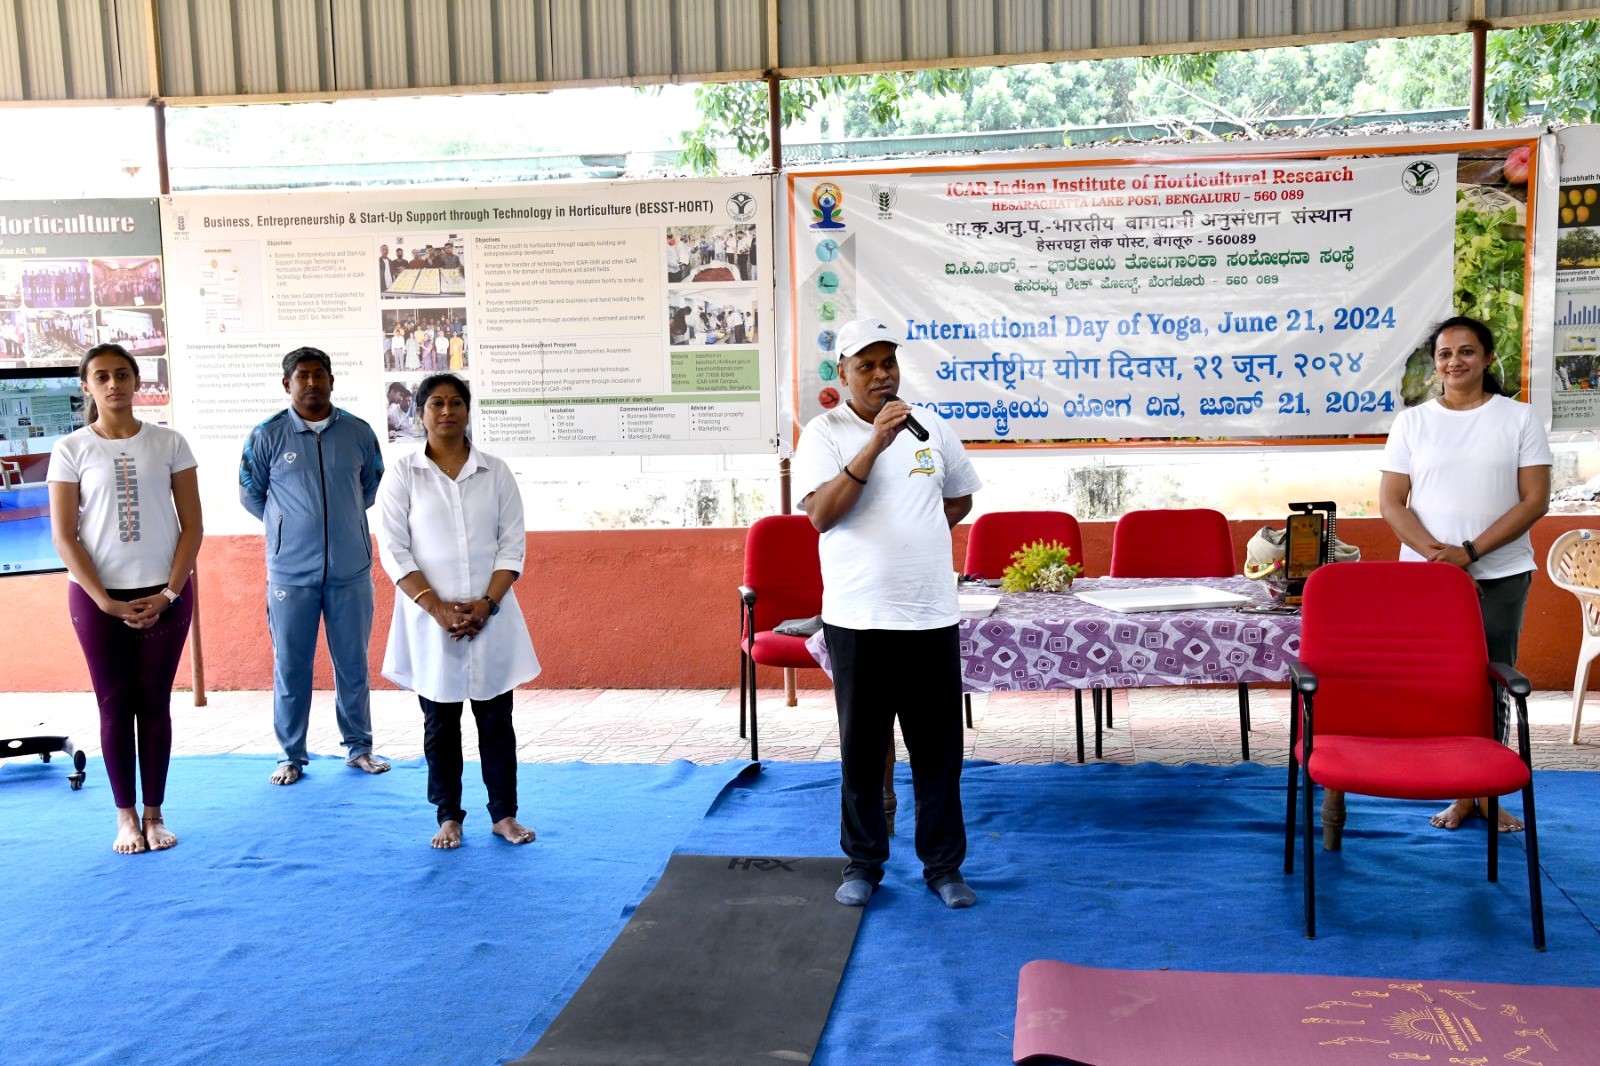 Celebration of 10th International Yoga Day at ICAR-Indian Institute of Horticultural Research, Hesaraghatta, Bengaluru on 21st June, 2024